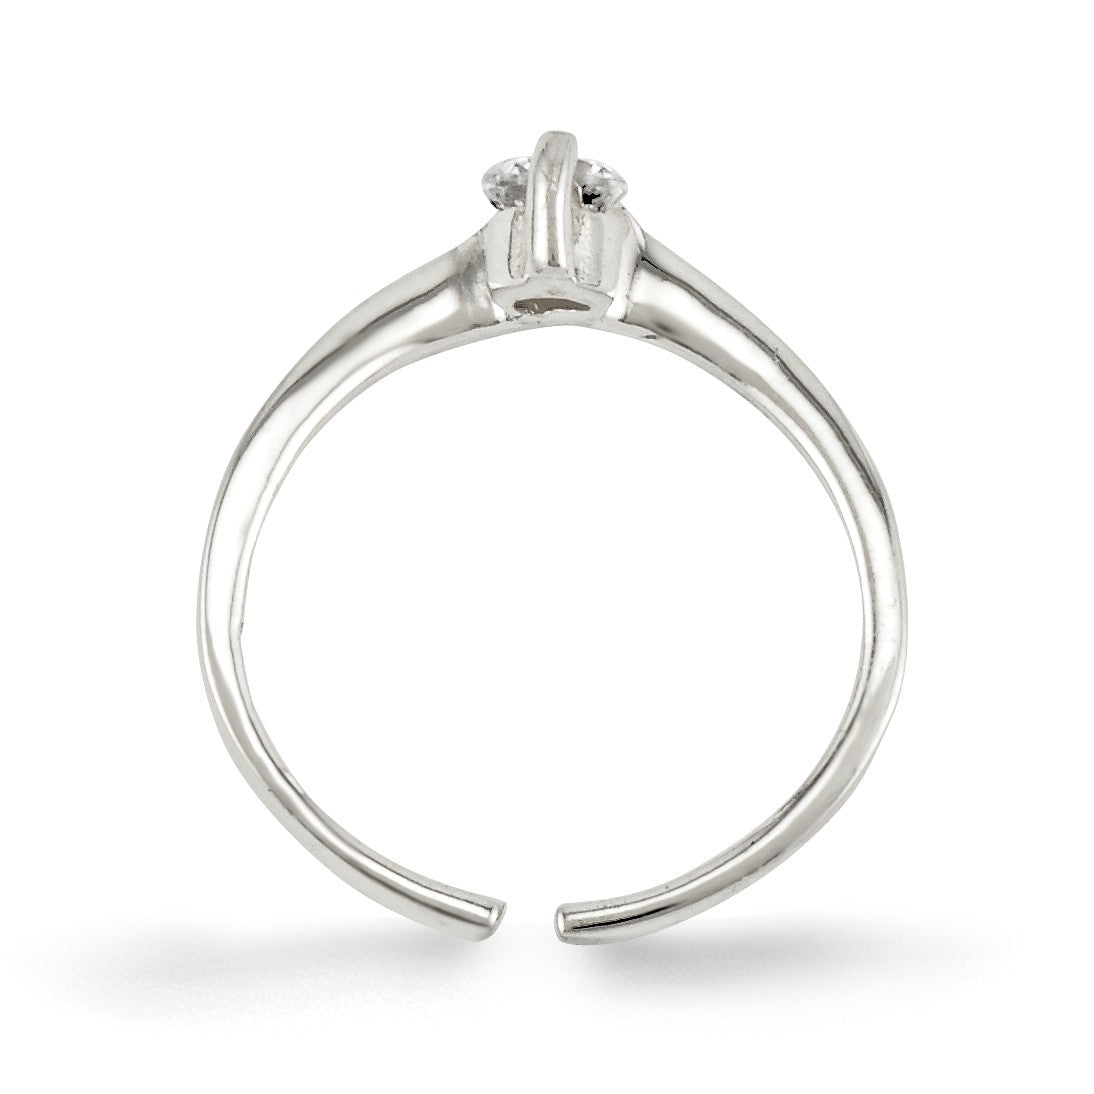 Alternate view of the 4mm Cubic Zirconia Gem V Shaped Toe Ring in Sterling Silver by The Black Bow Jewelry Co.